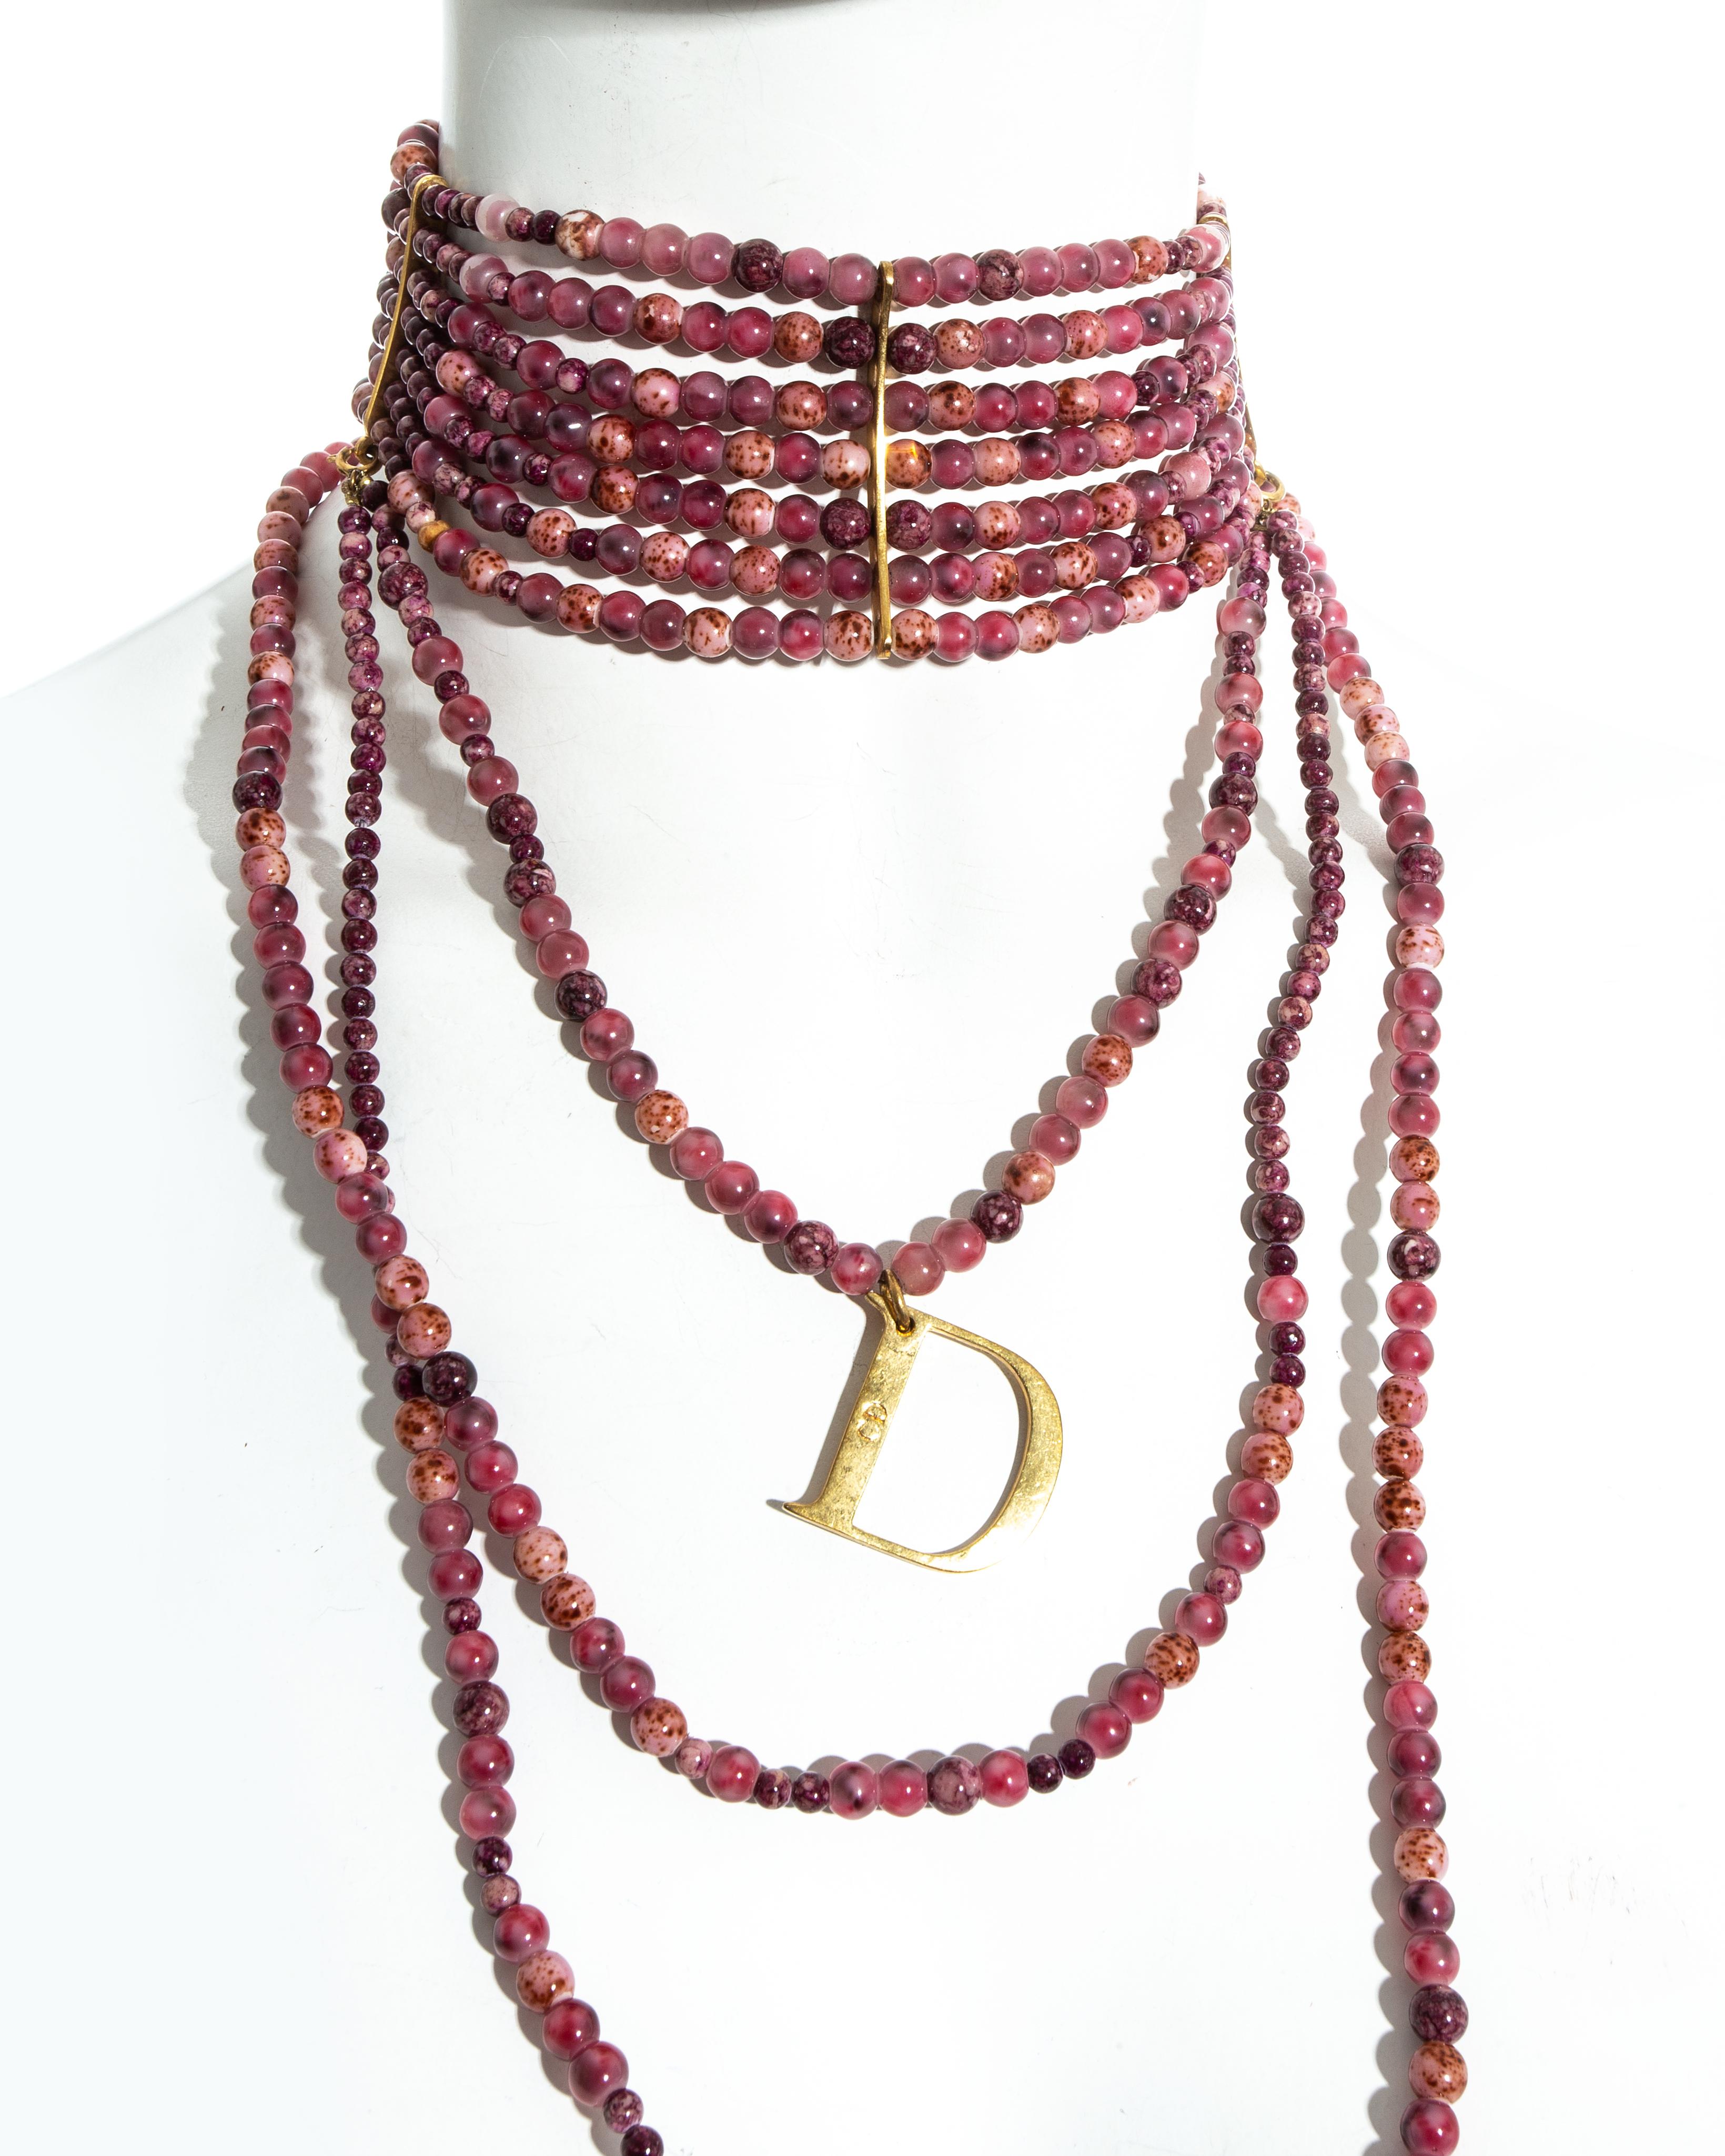 Christian Dior by John Galliano pink marble glass bead choker necklace, fw 1999 2